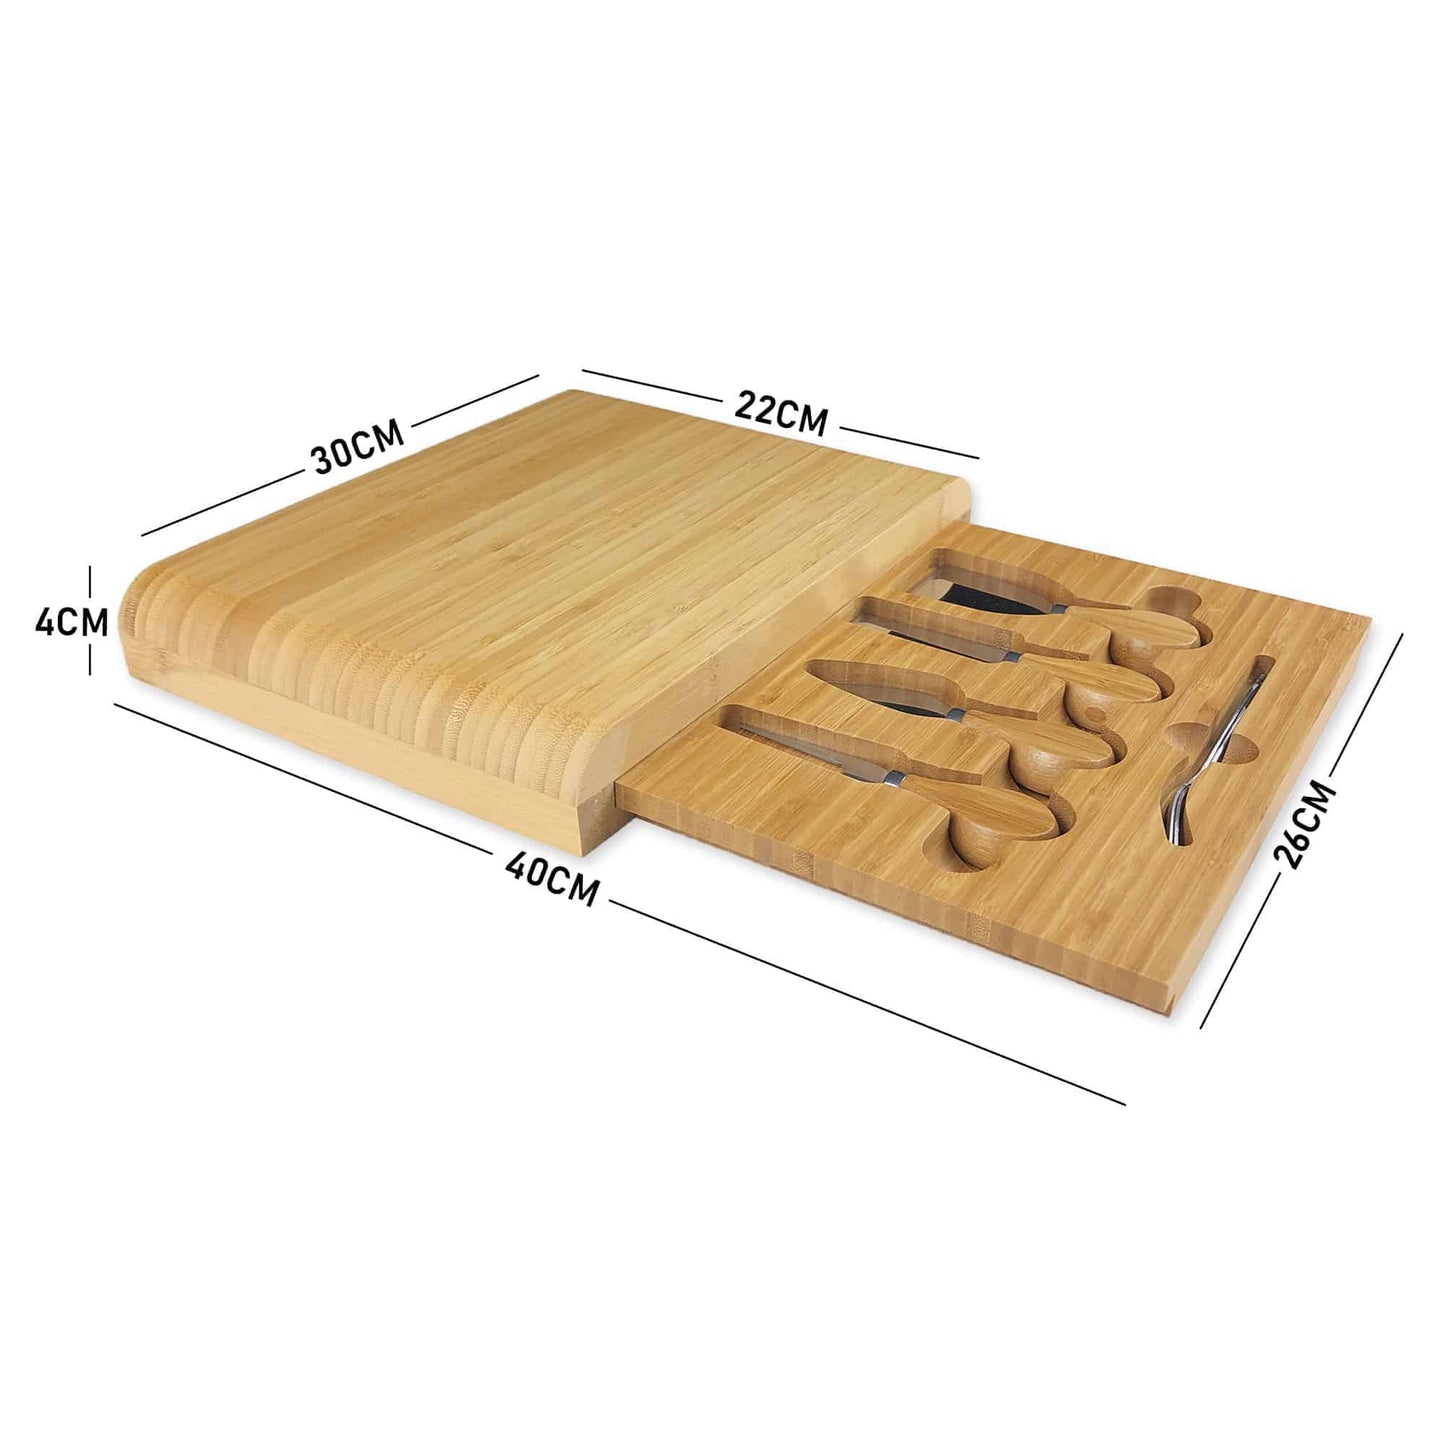 Happy Fathers Day Cheese board With Knives Gift Set